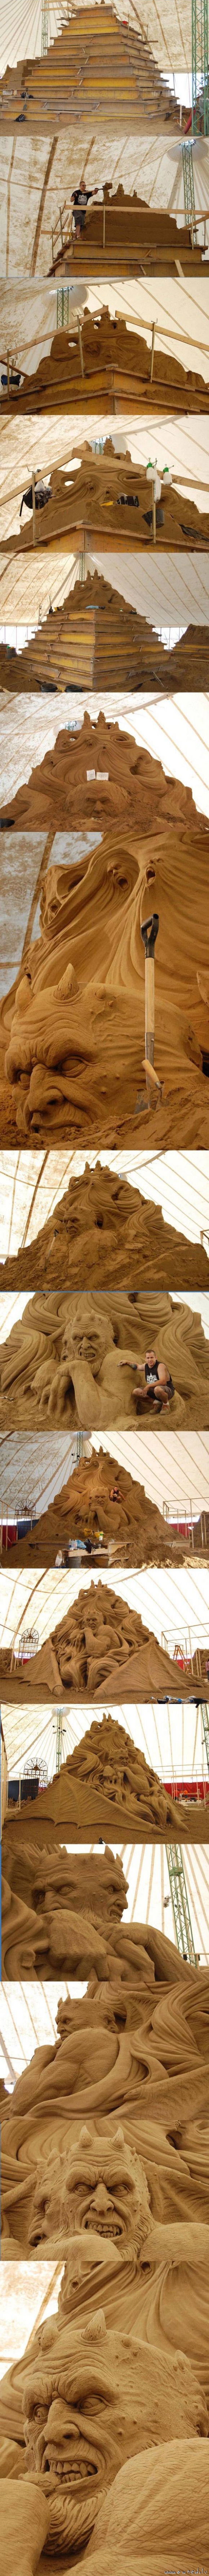 Awesome sandcastle art